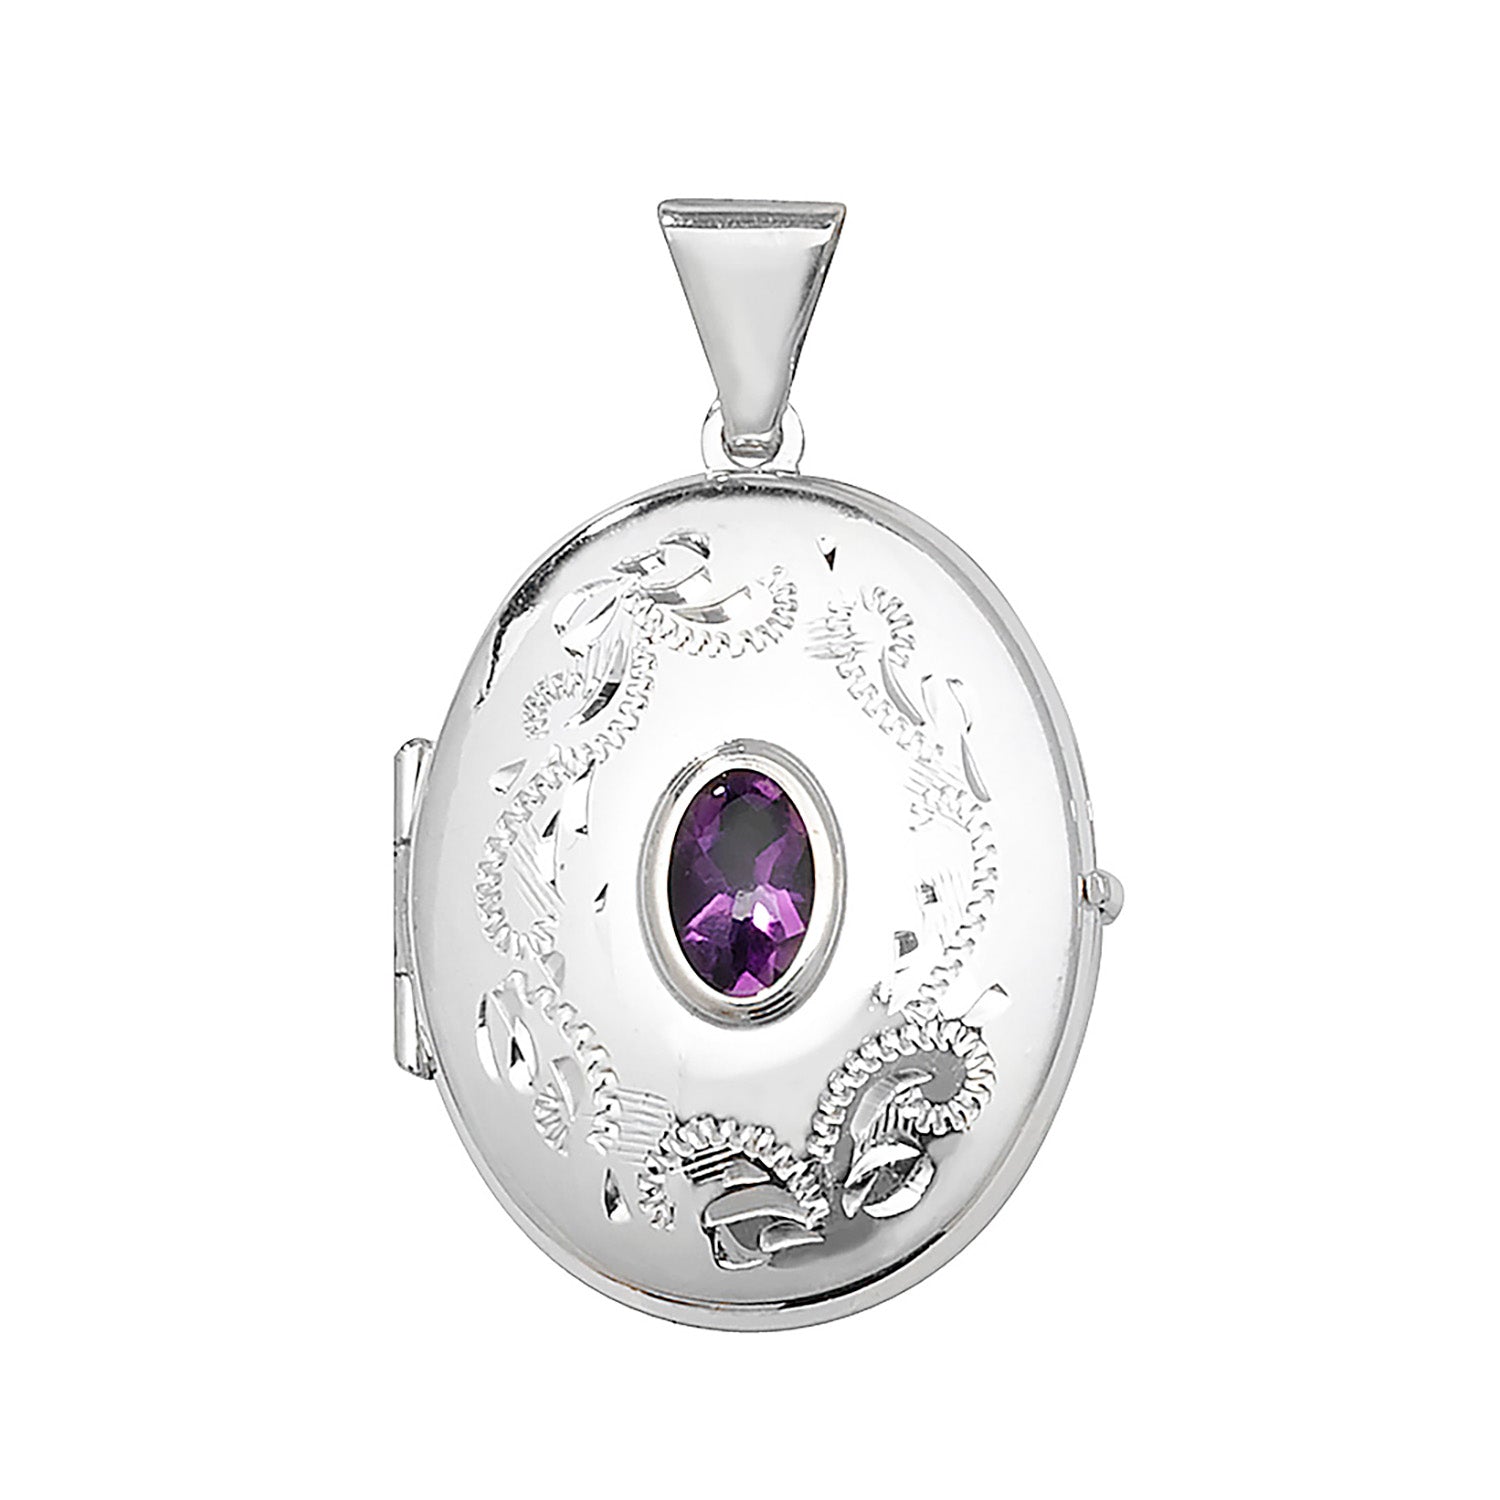 Silver Oval Locket Pendant with Amethyst